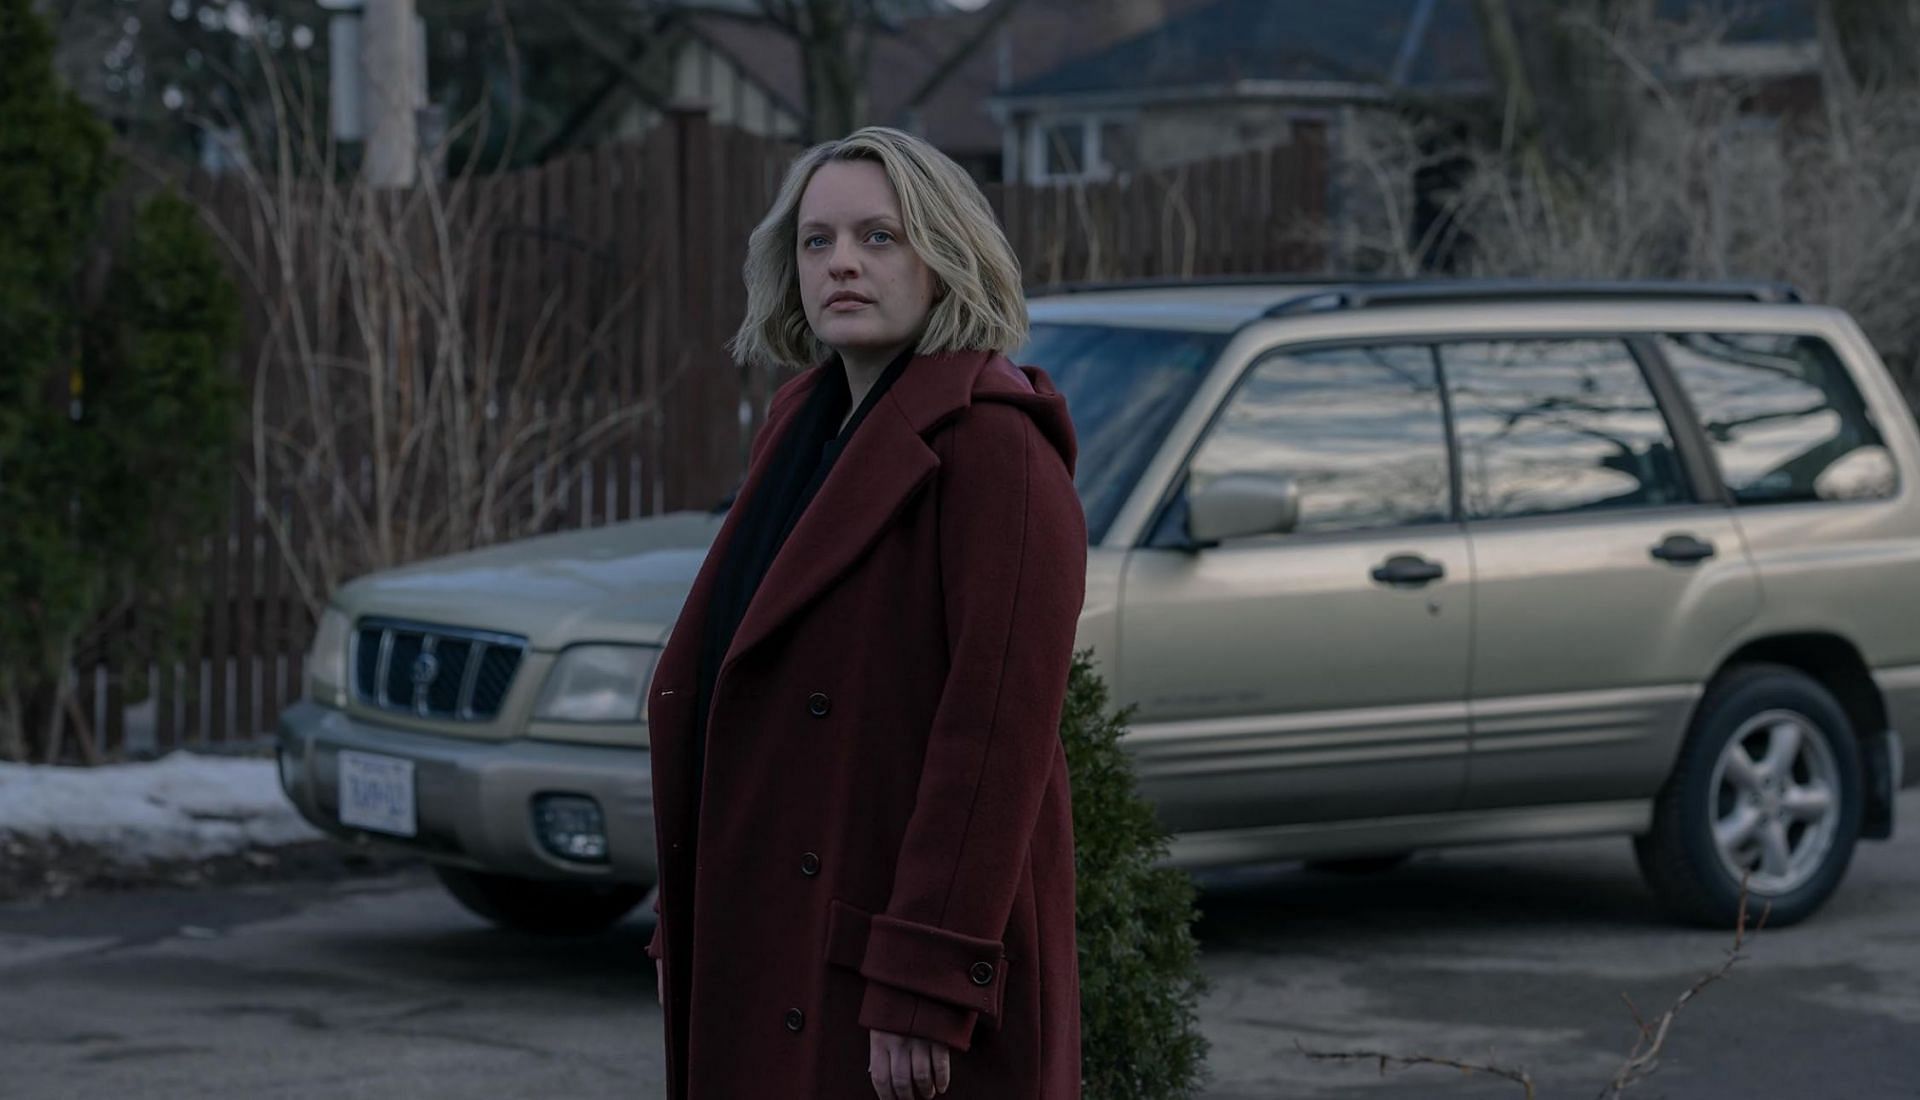 Elisabeth Moss in a still from The Handmaid